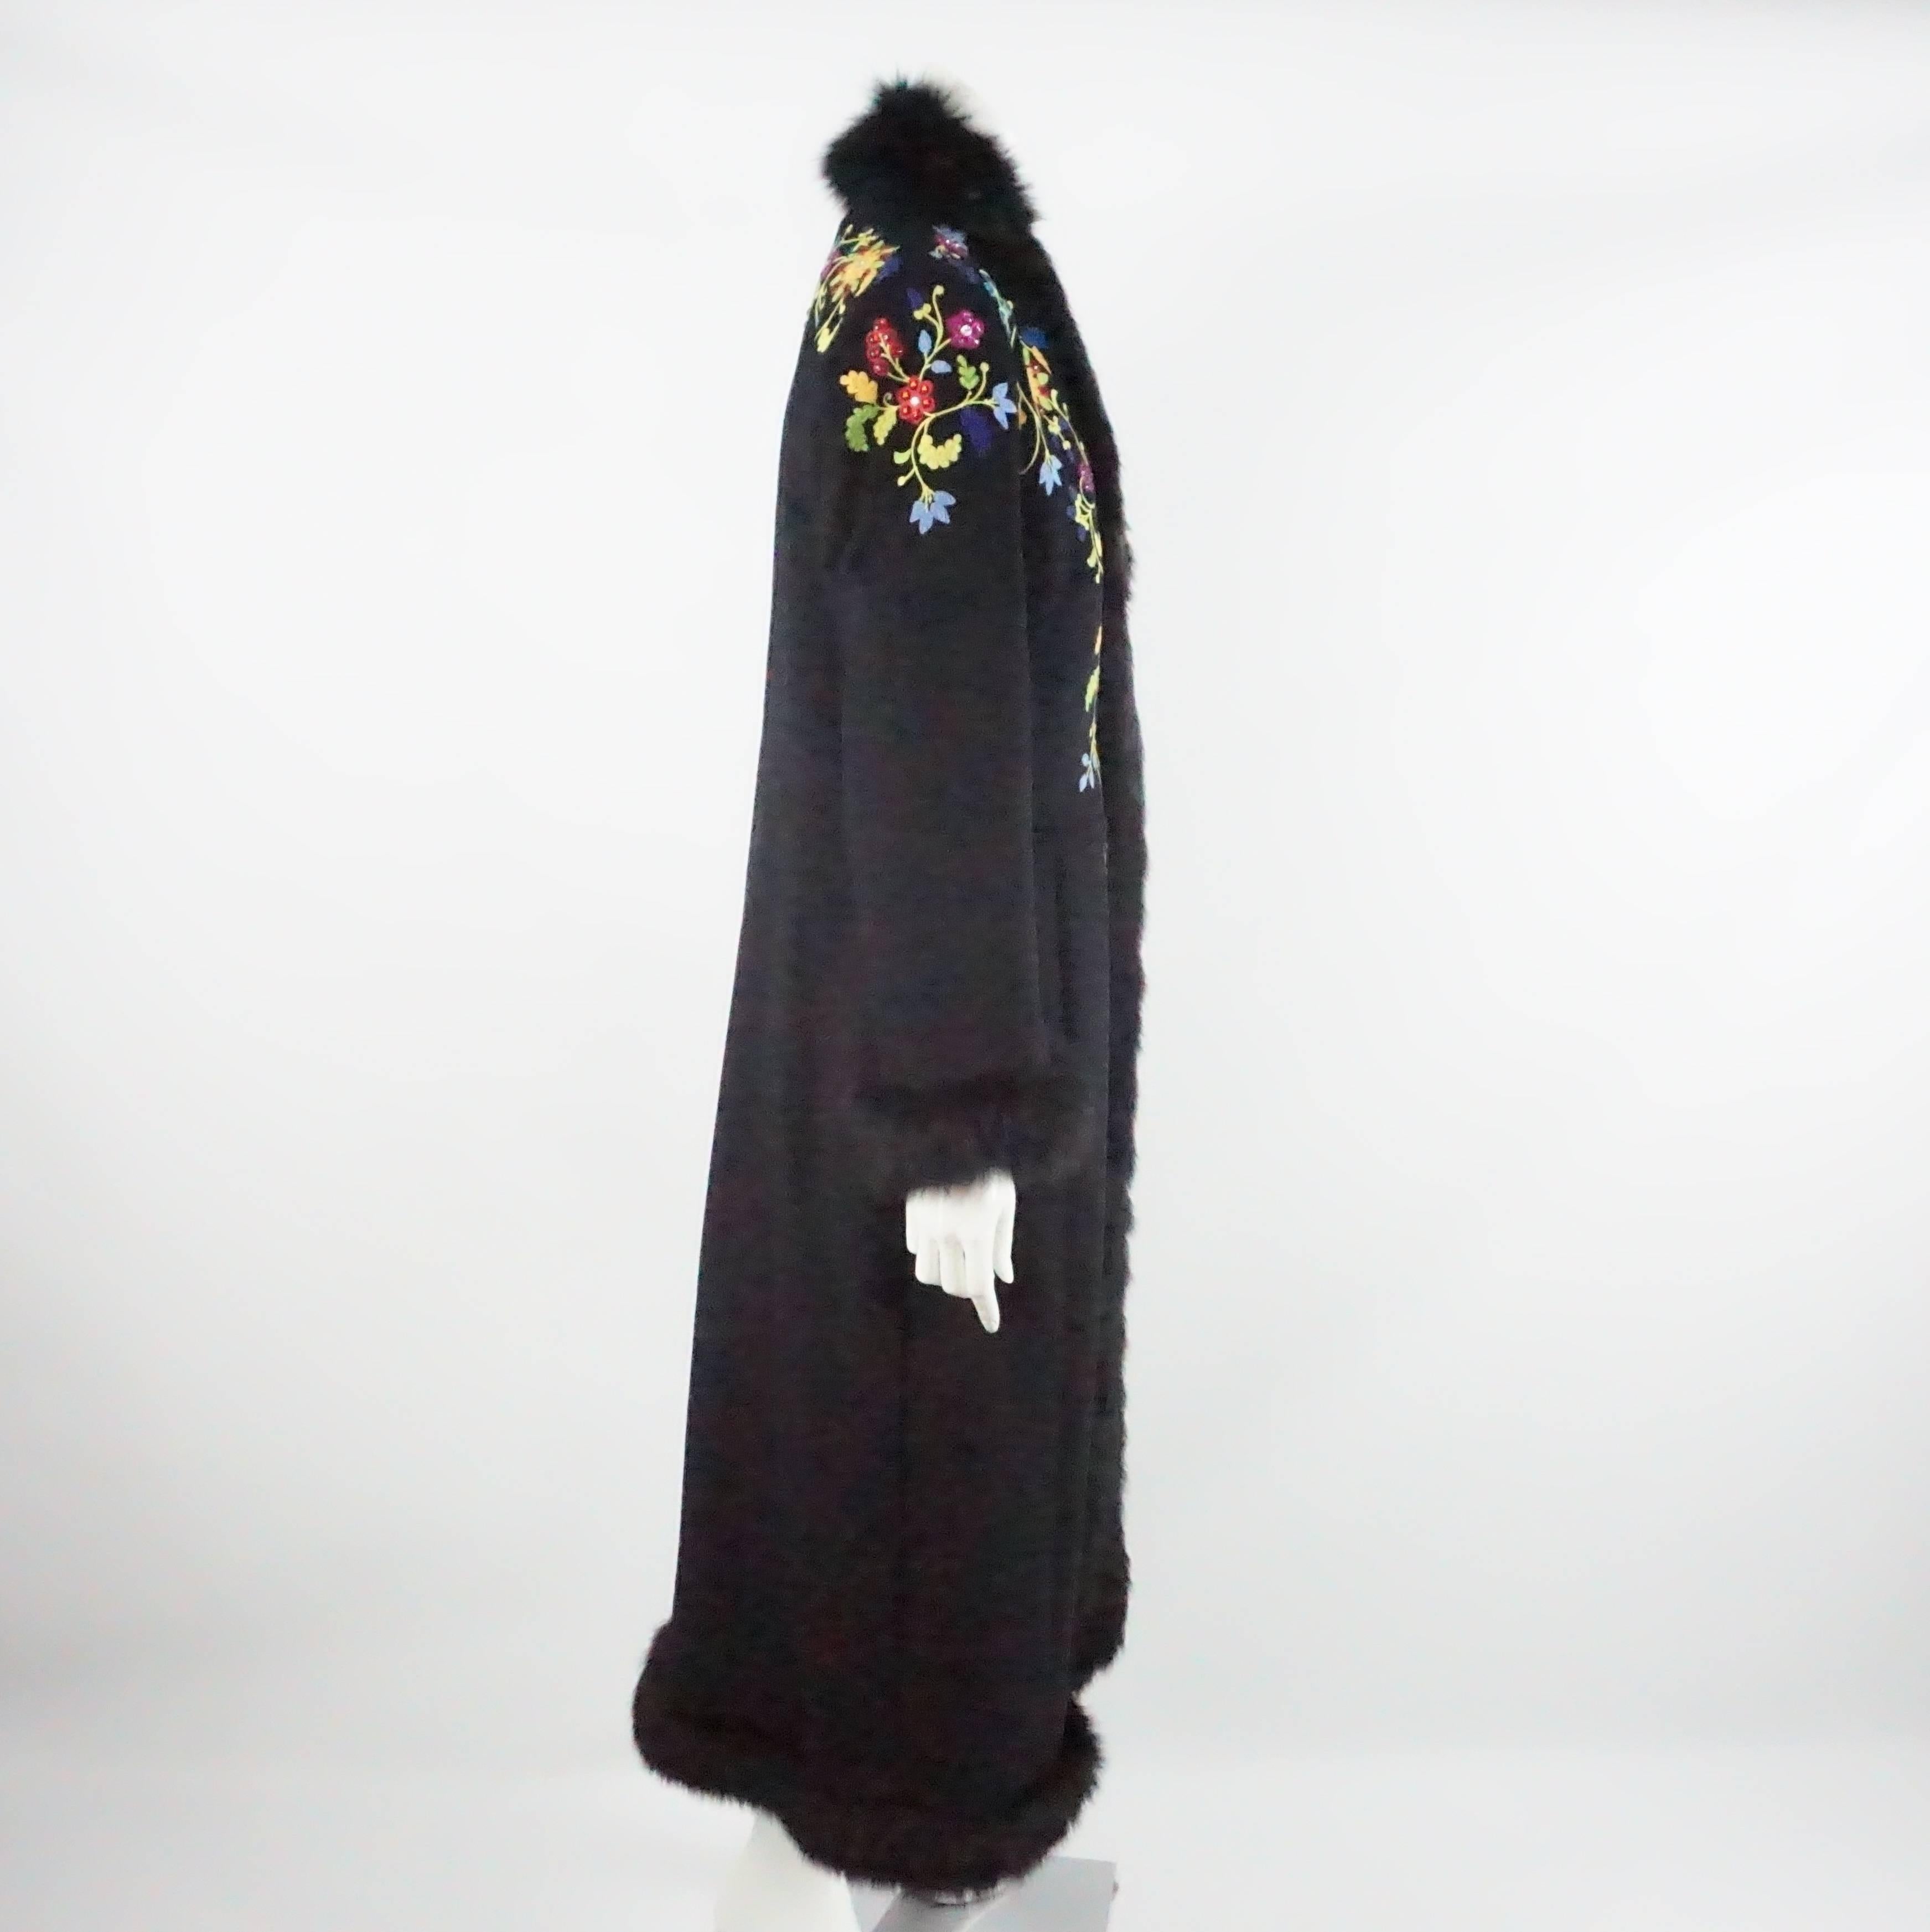 This Escada black coat is made of angora and virgin wool with a fox fur trim. It also has multi colored embroidery with colored rhinestones. The coat is floor length with side pockets and light shoulder pads. It closes with hook and eye closures